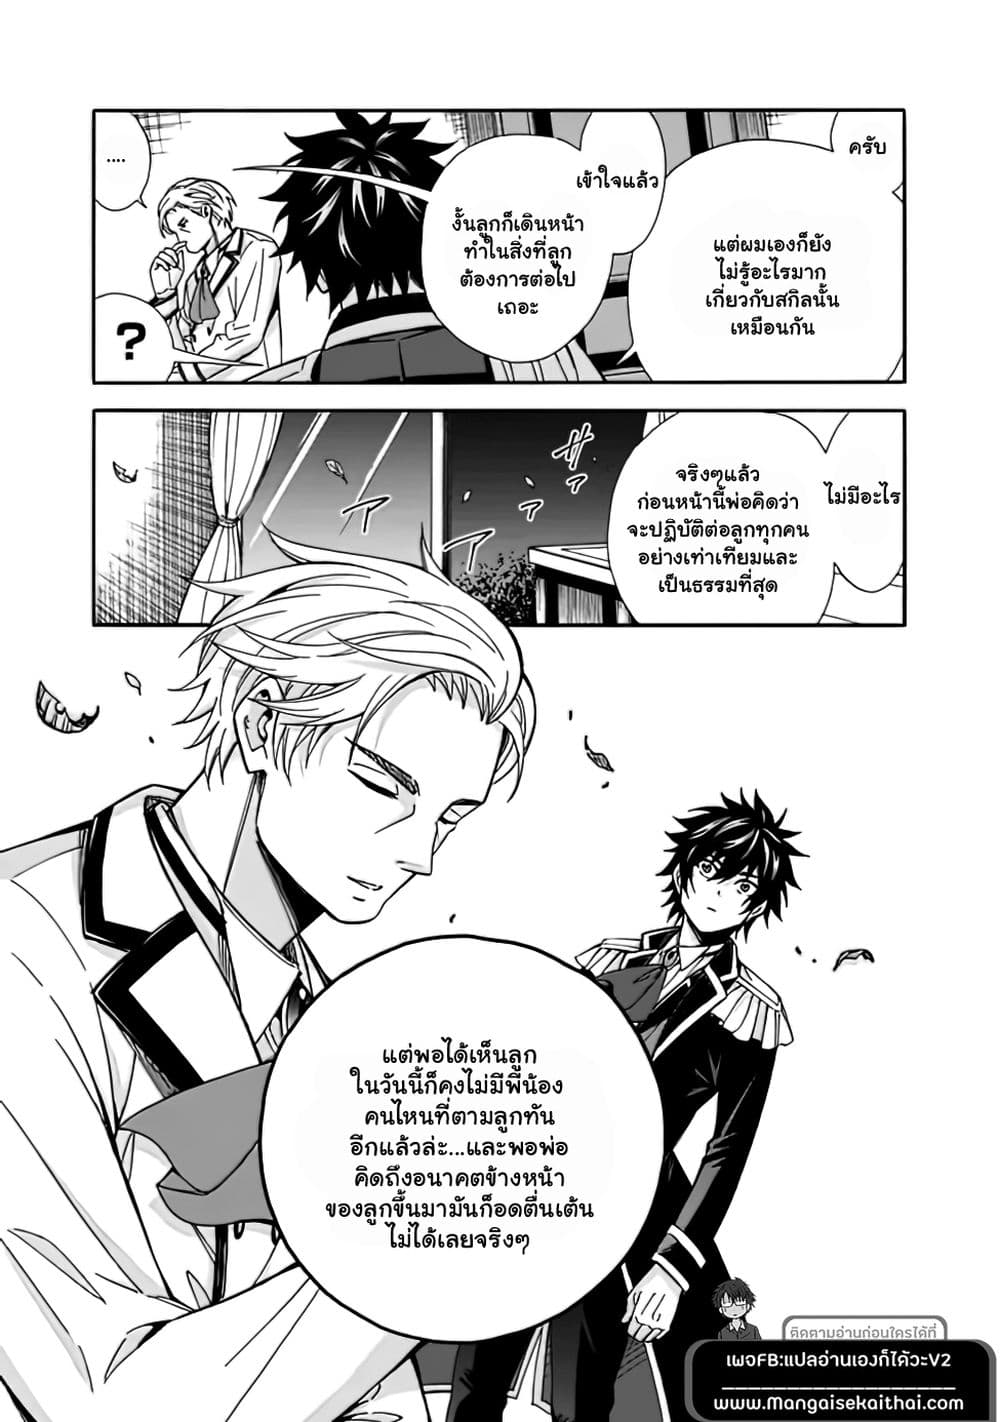 The Best Noble In Another World10.1 (7)